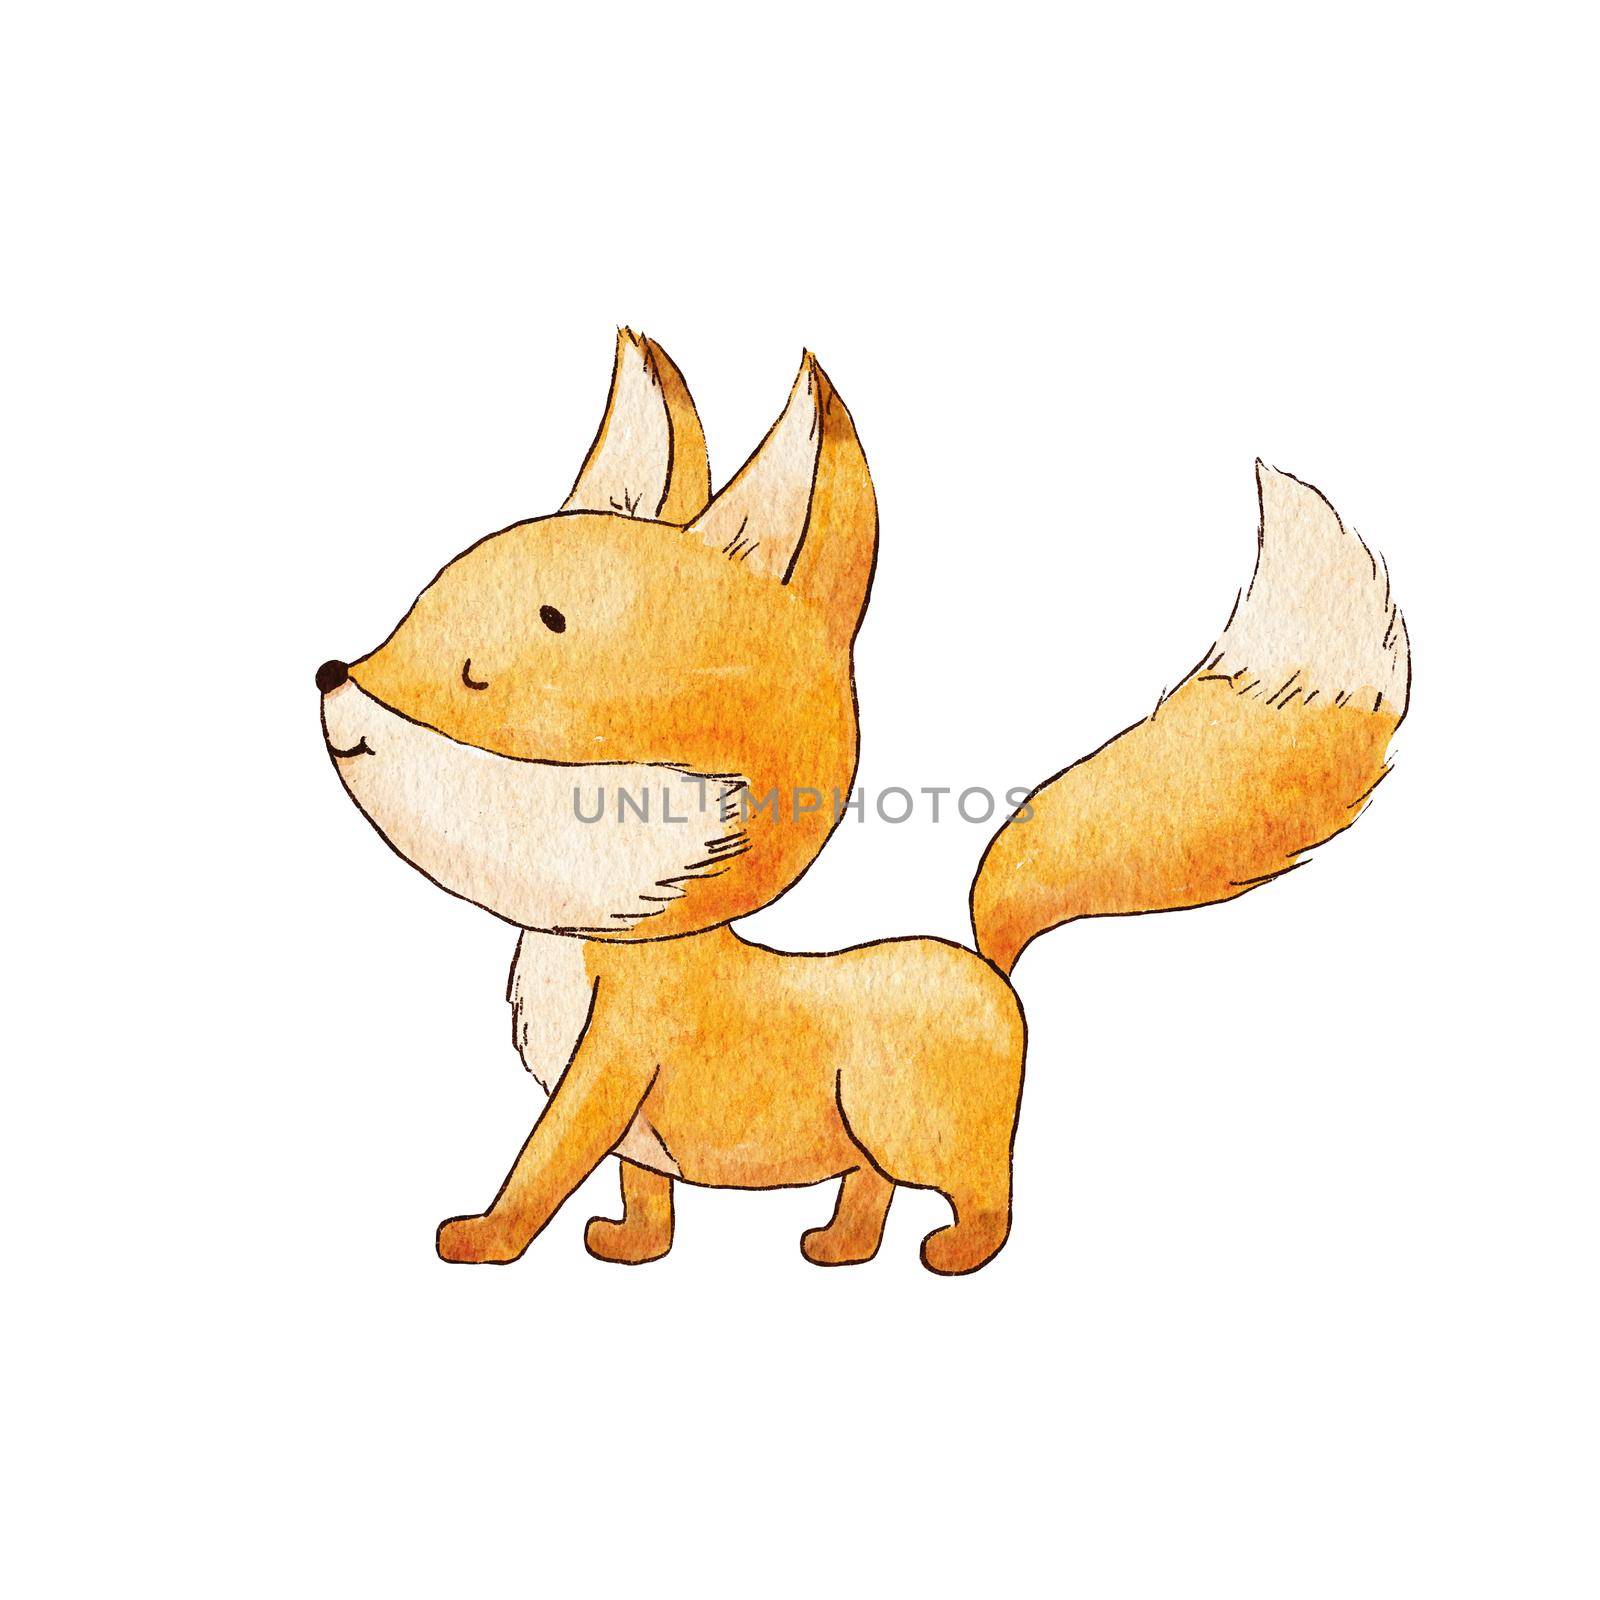 Cute baby fox going. Watercolor childish illustration isolated on white. Woodland little animal by ElenaPlatova